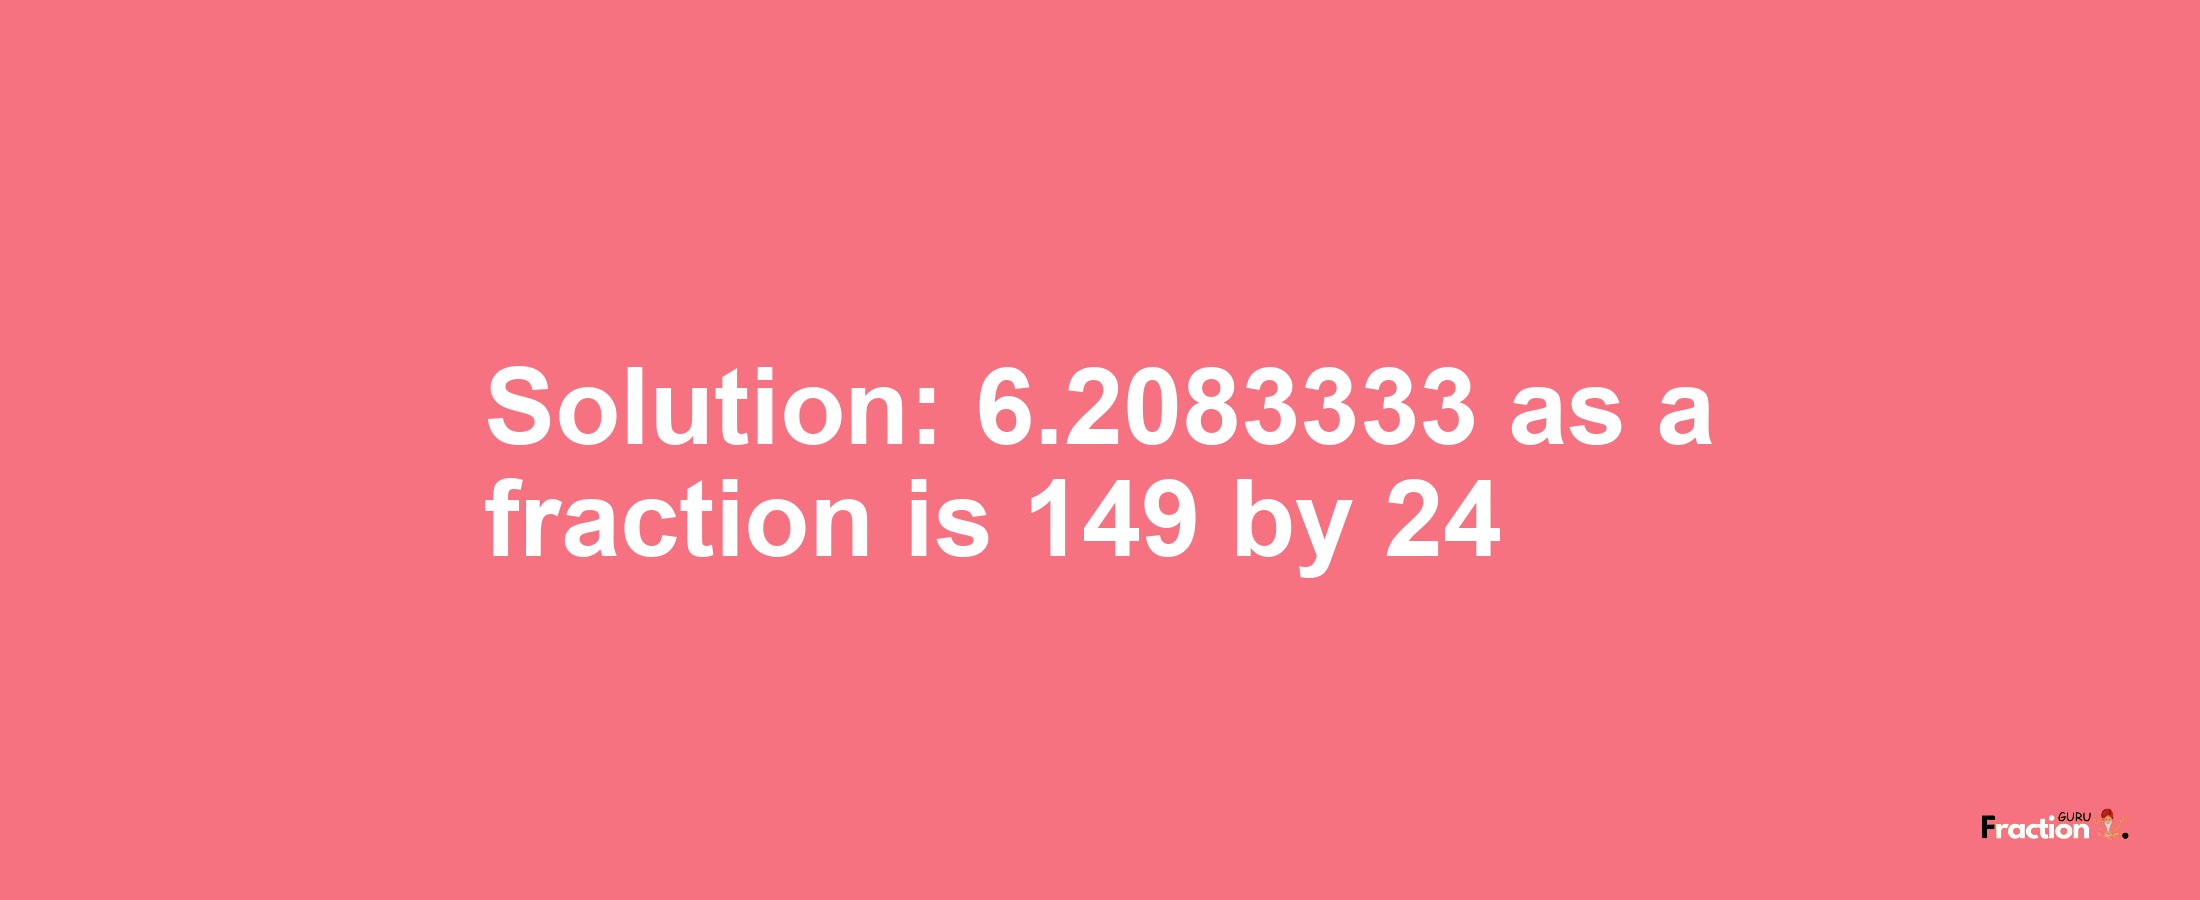 Solution:6.2083333 as a fraction is 149/24